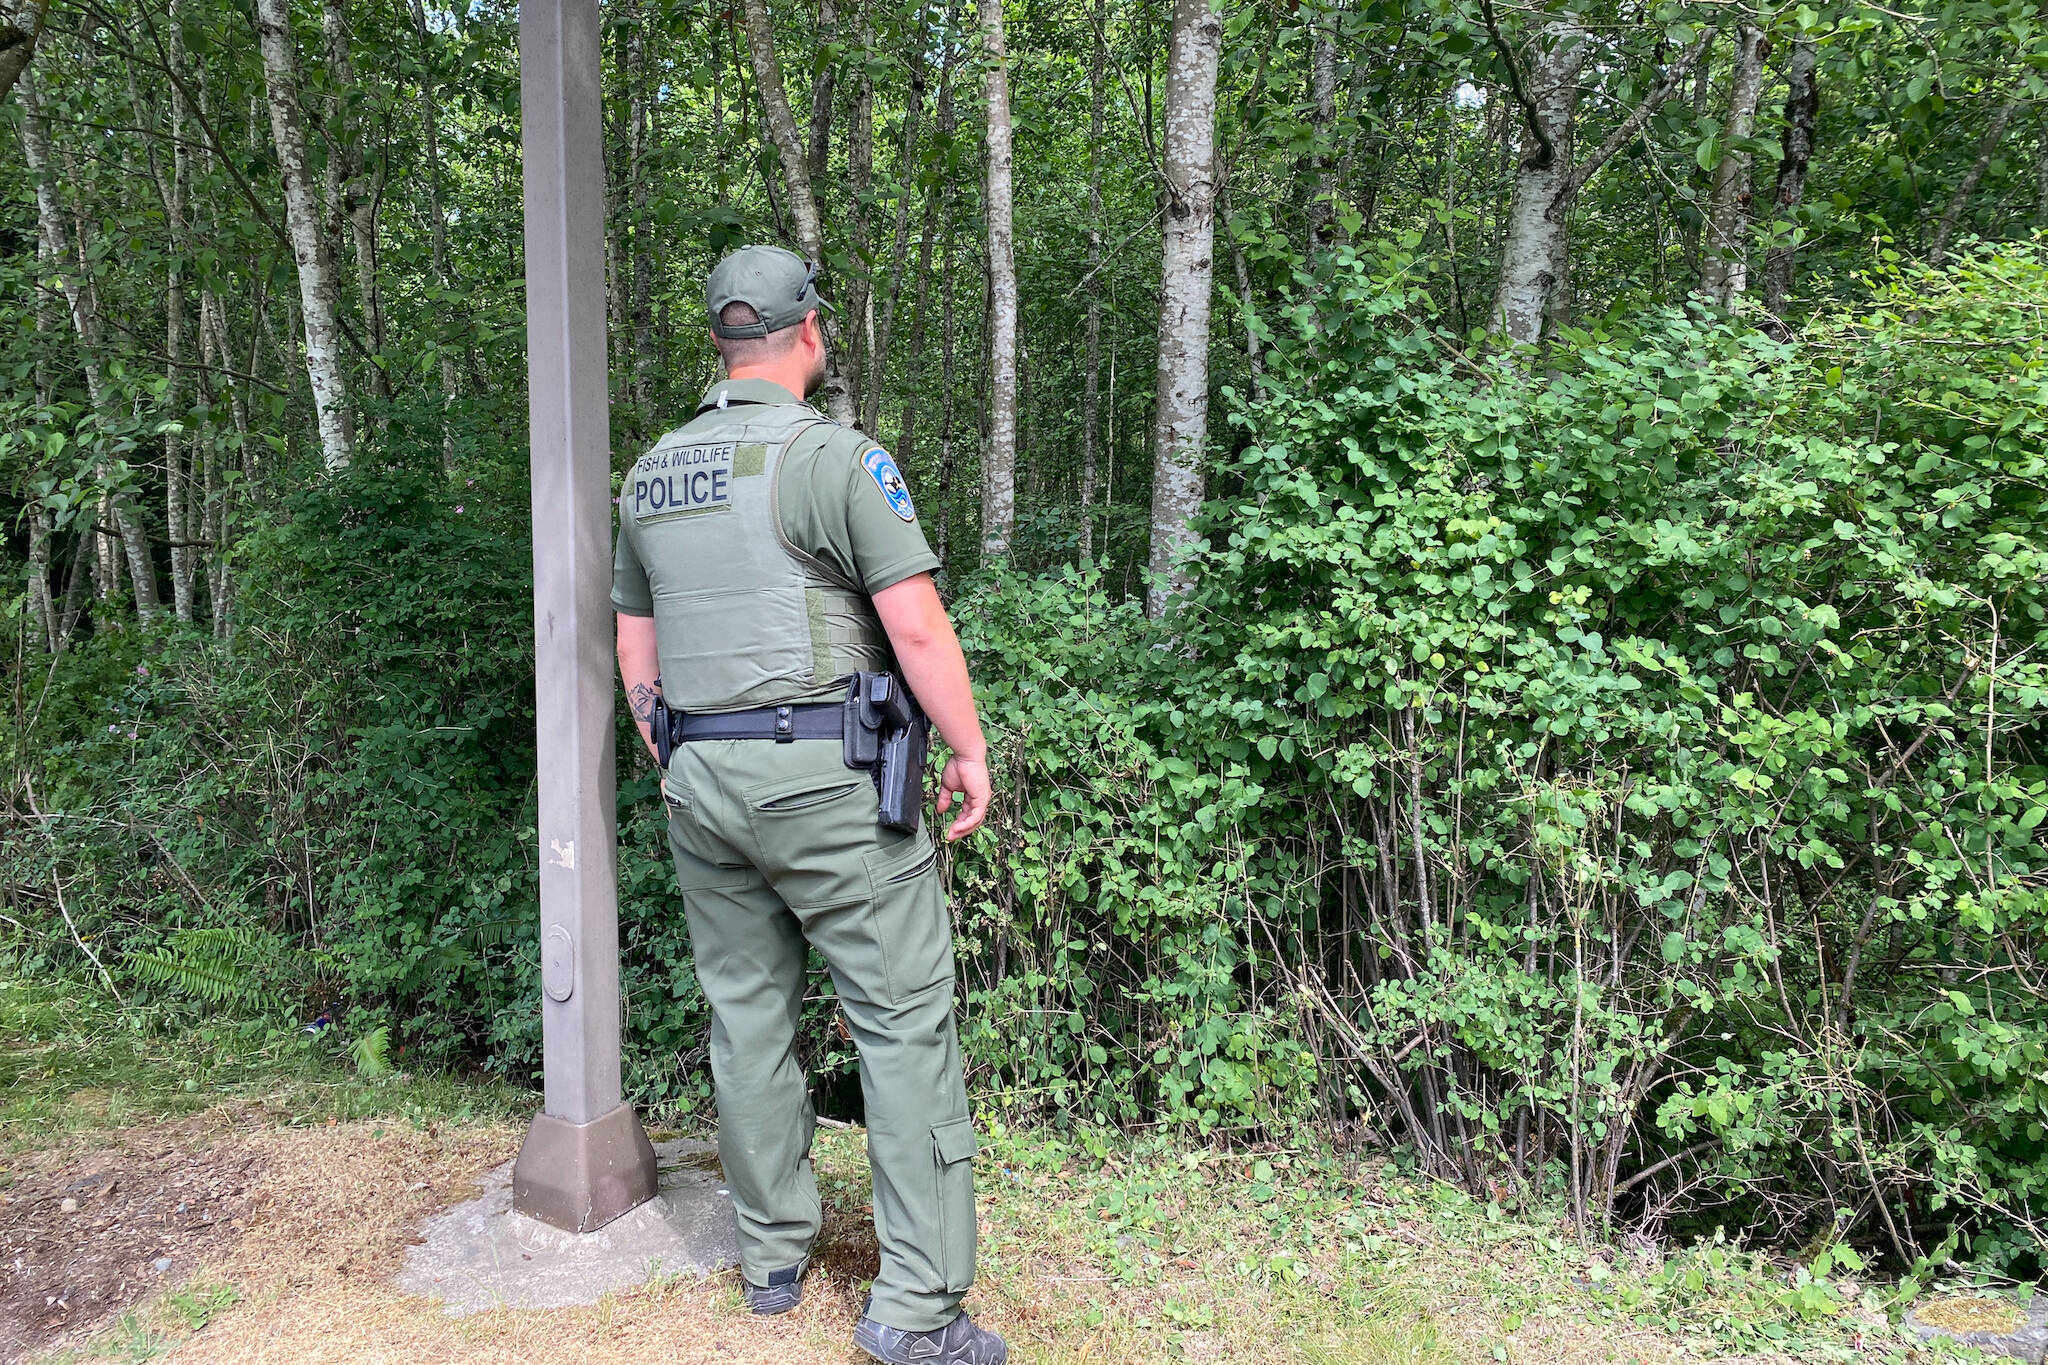 A Fish and Wildlife officer looks at the tree line where the bear retreated Wednesday, June 8, 2023 in Everett, Washington. The Washington Department of Fish and Wildlife respond to number of calls involving black bears each year. (Photo provided by the Washington Department of Fish and Wildlife)